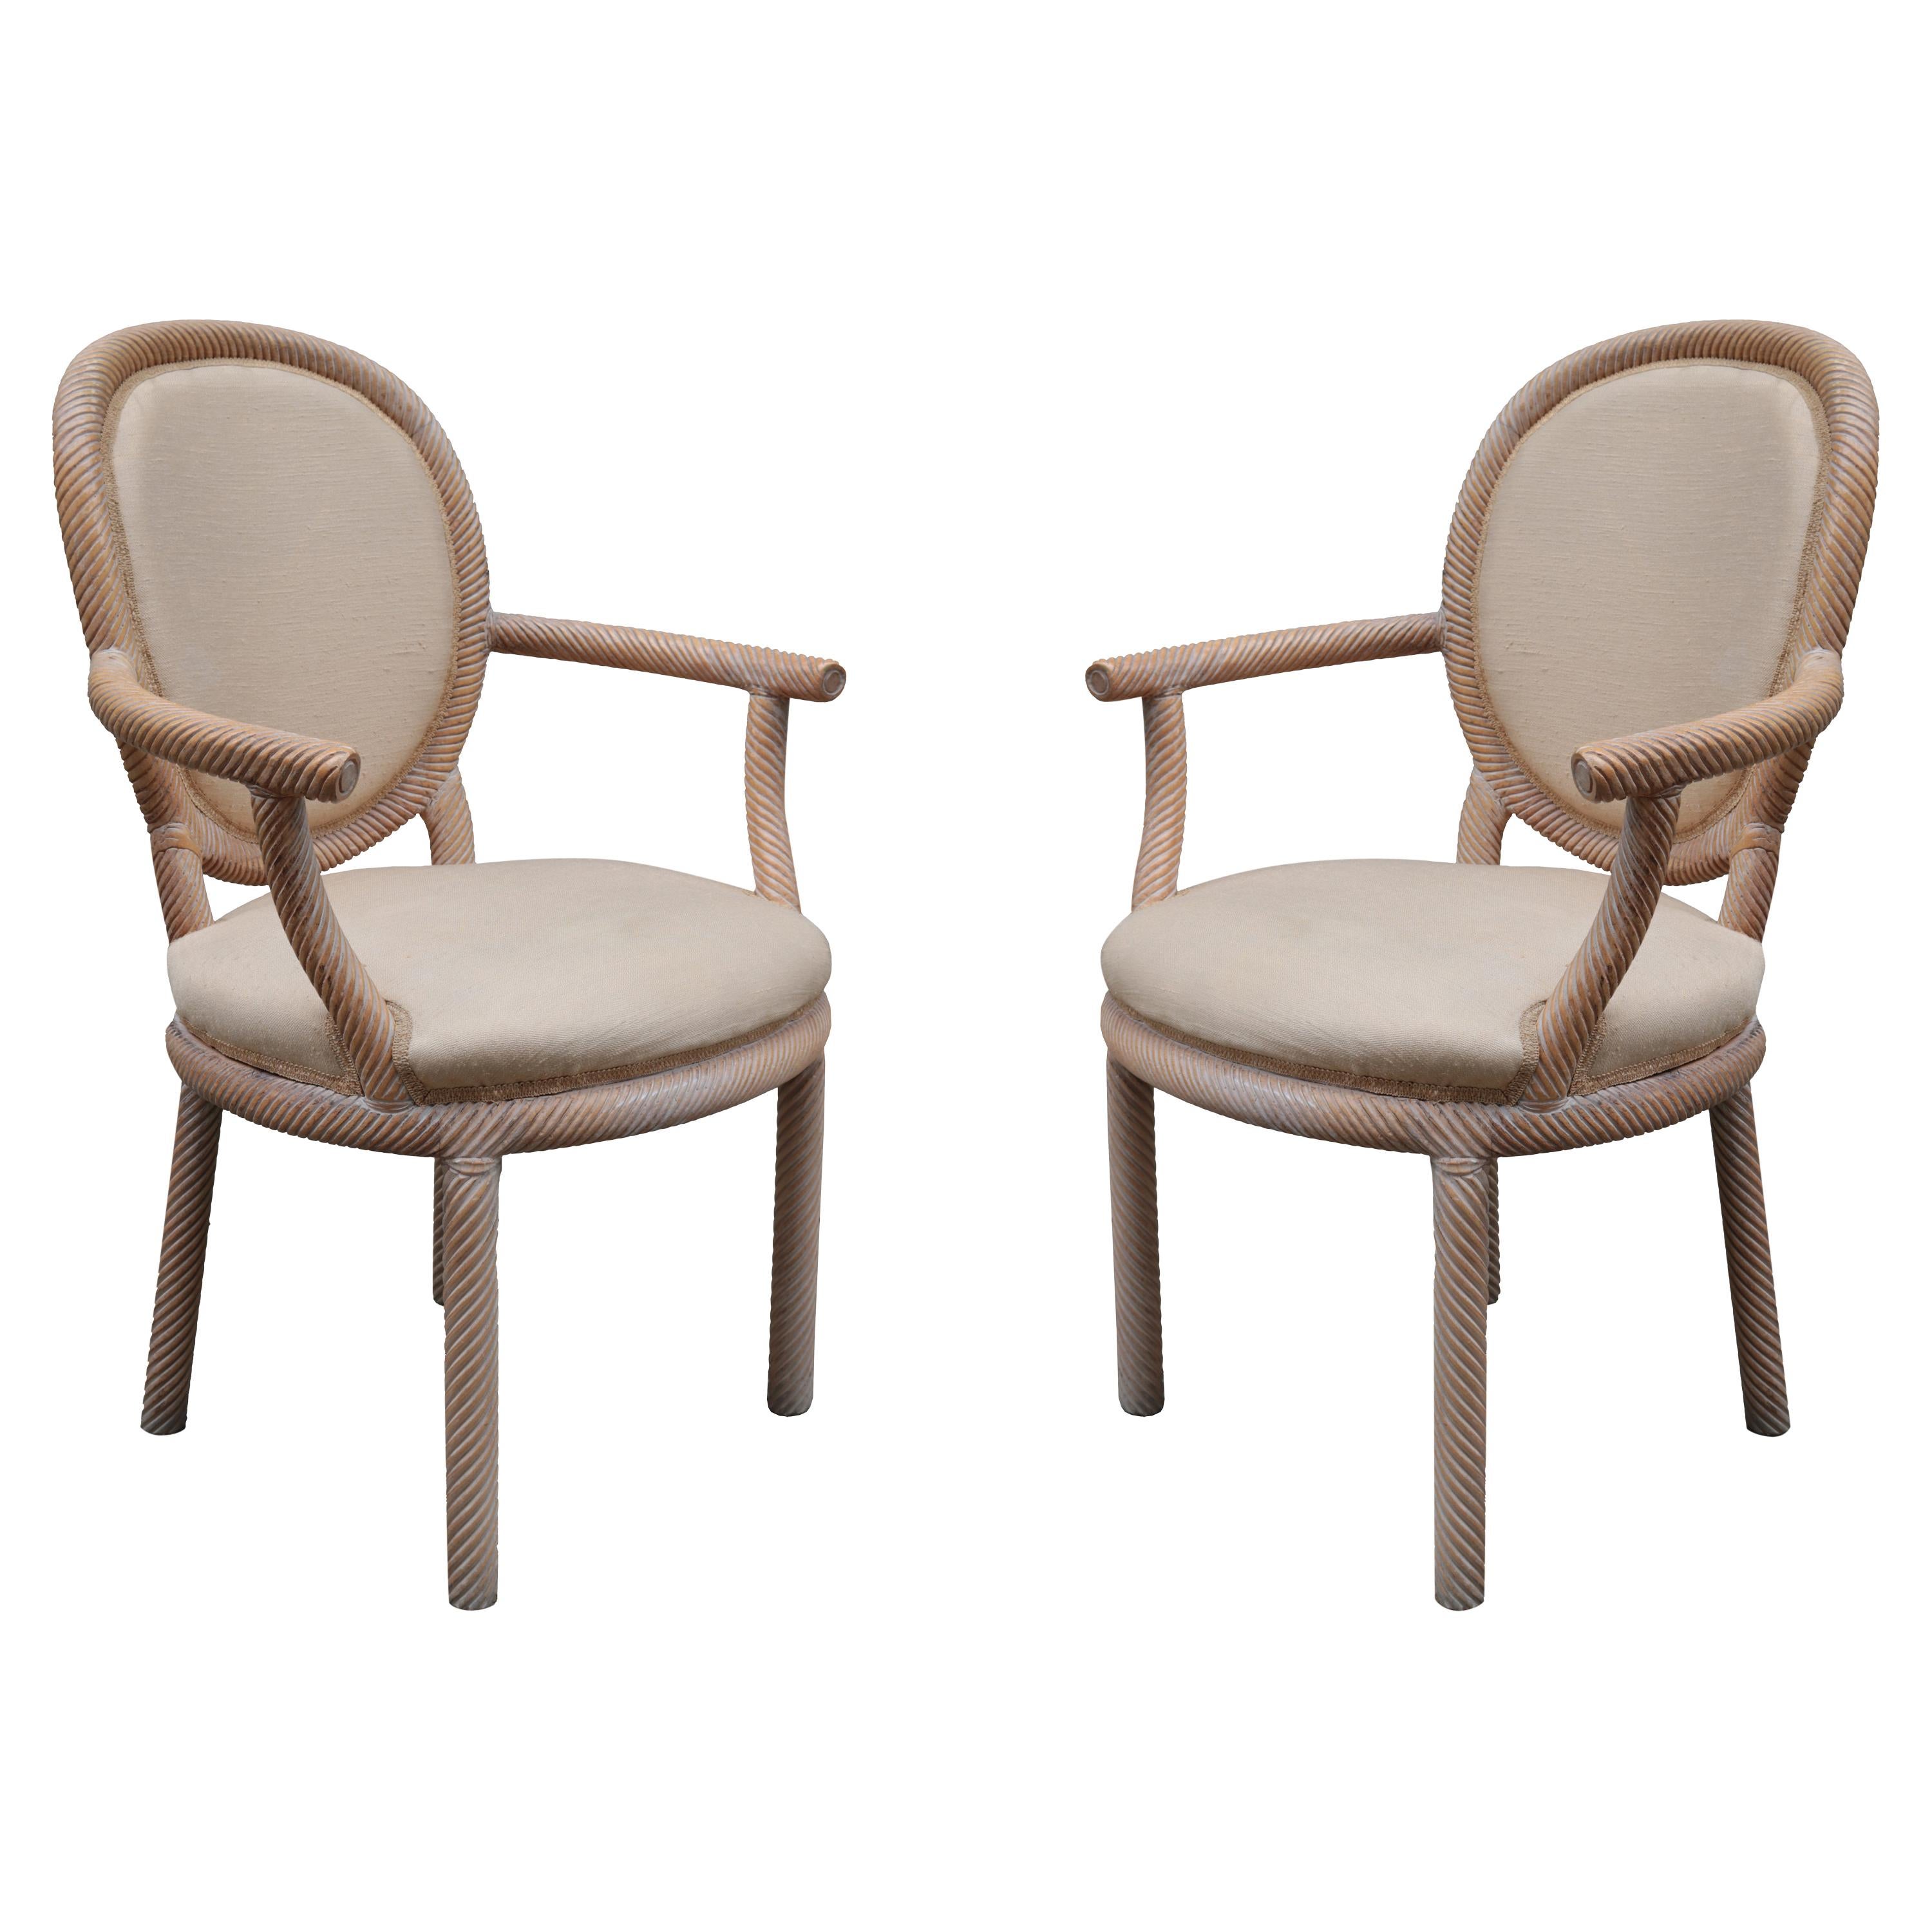 Pair of Carved Armchairs by Arpex For Sale